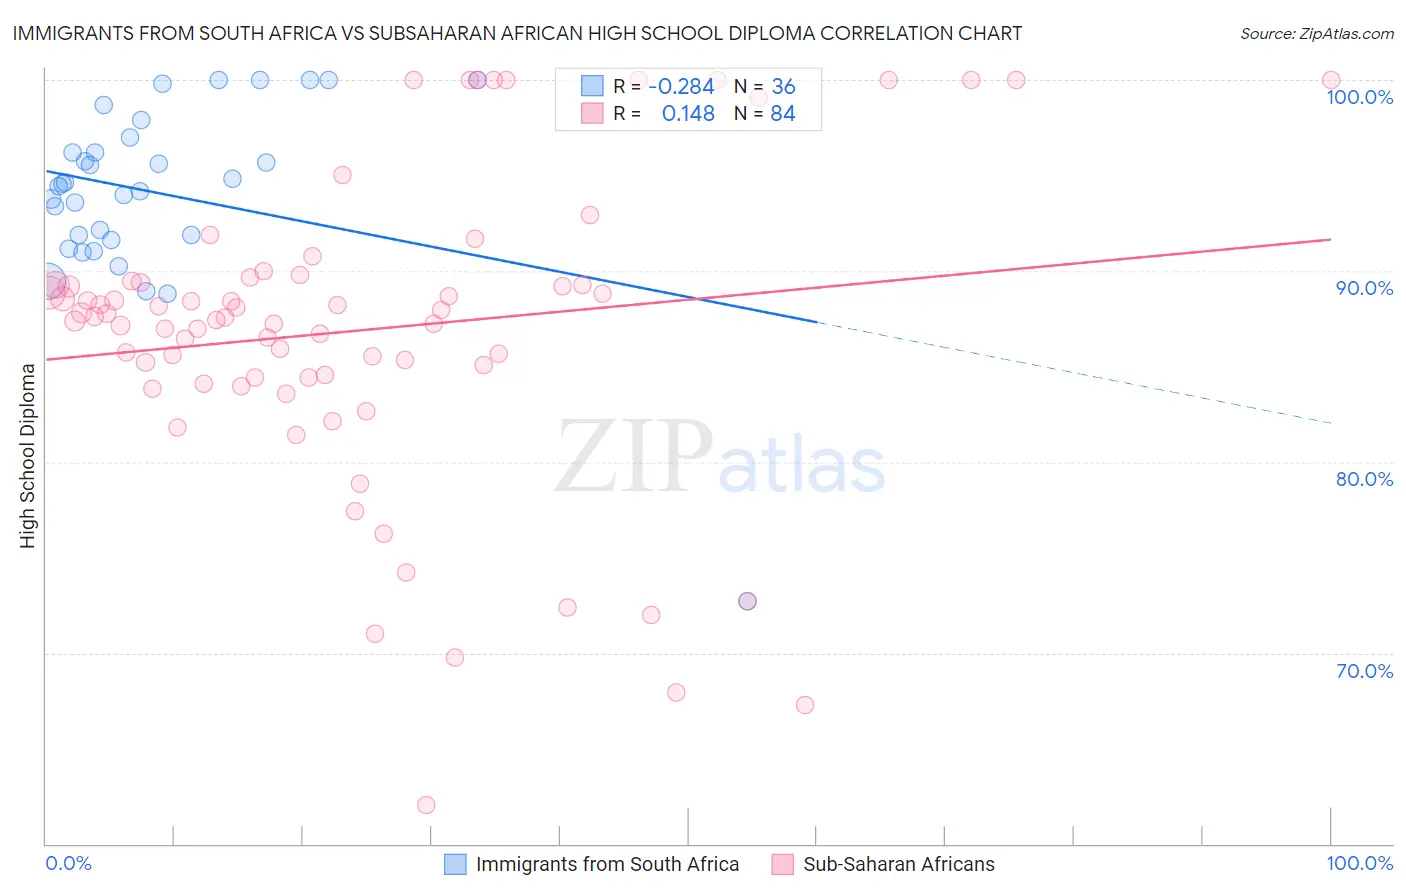 Immigrants from South Africa vs Subsaharan African High School Diploma